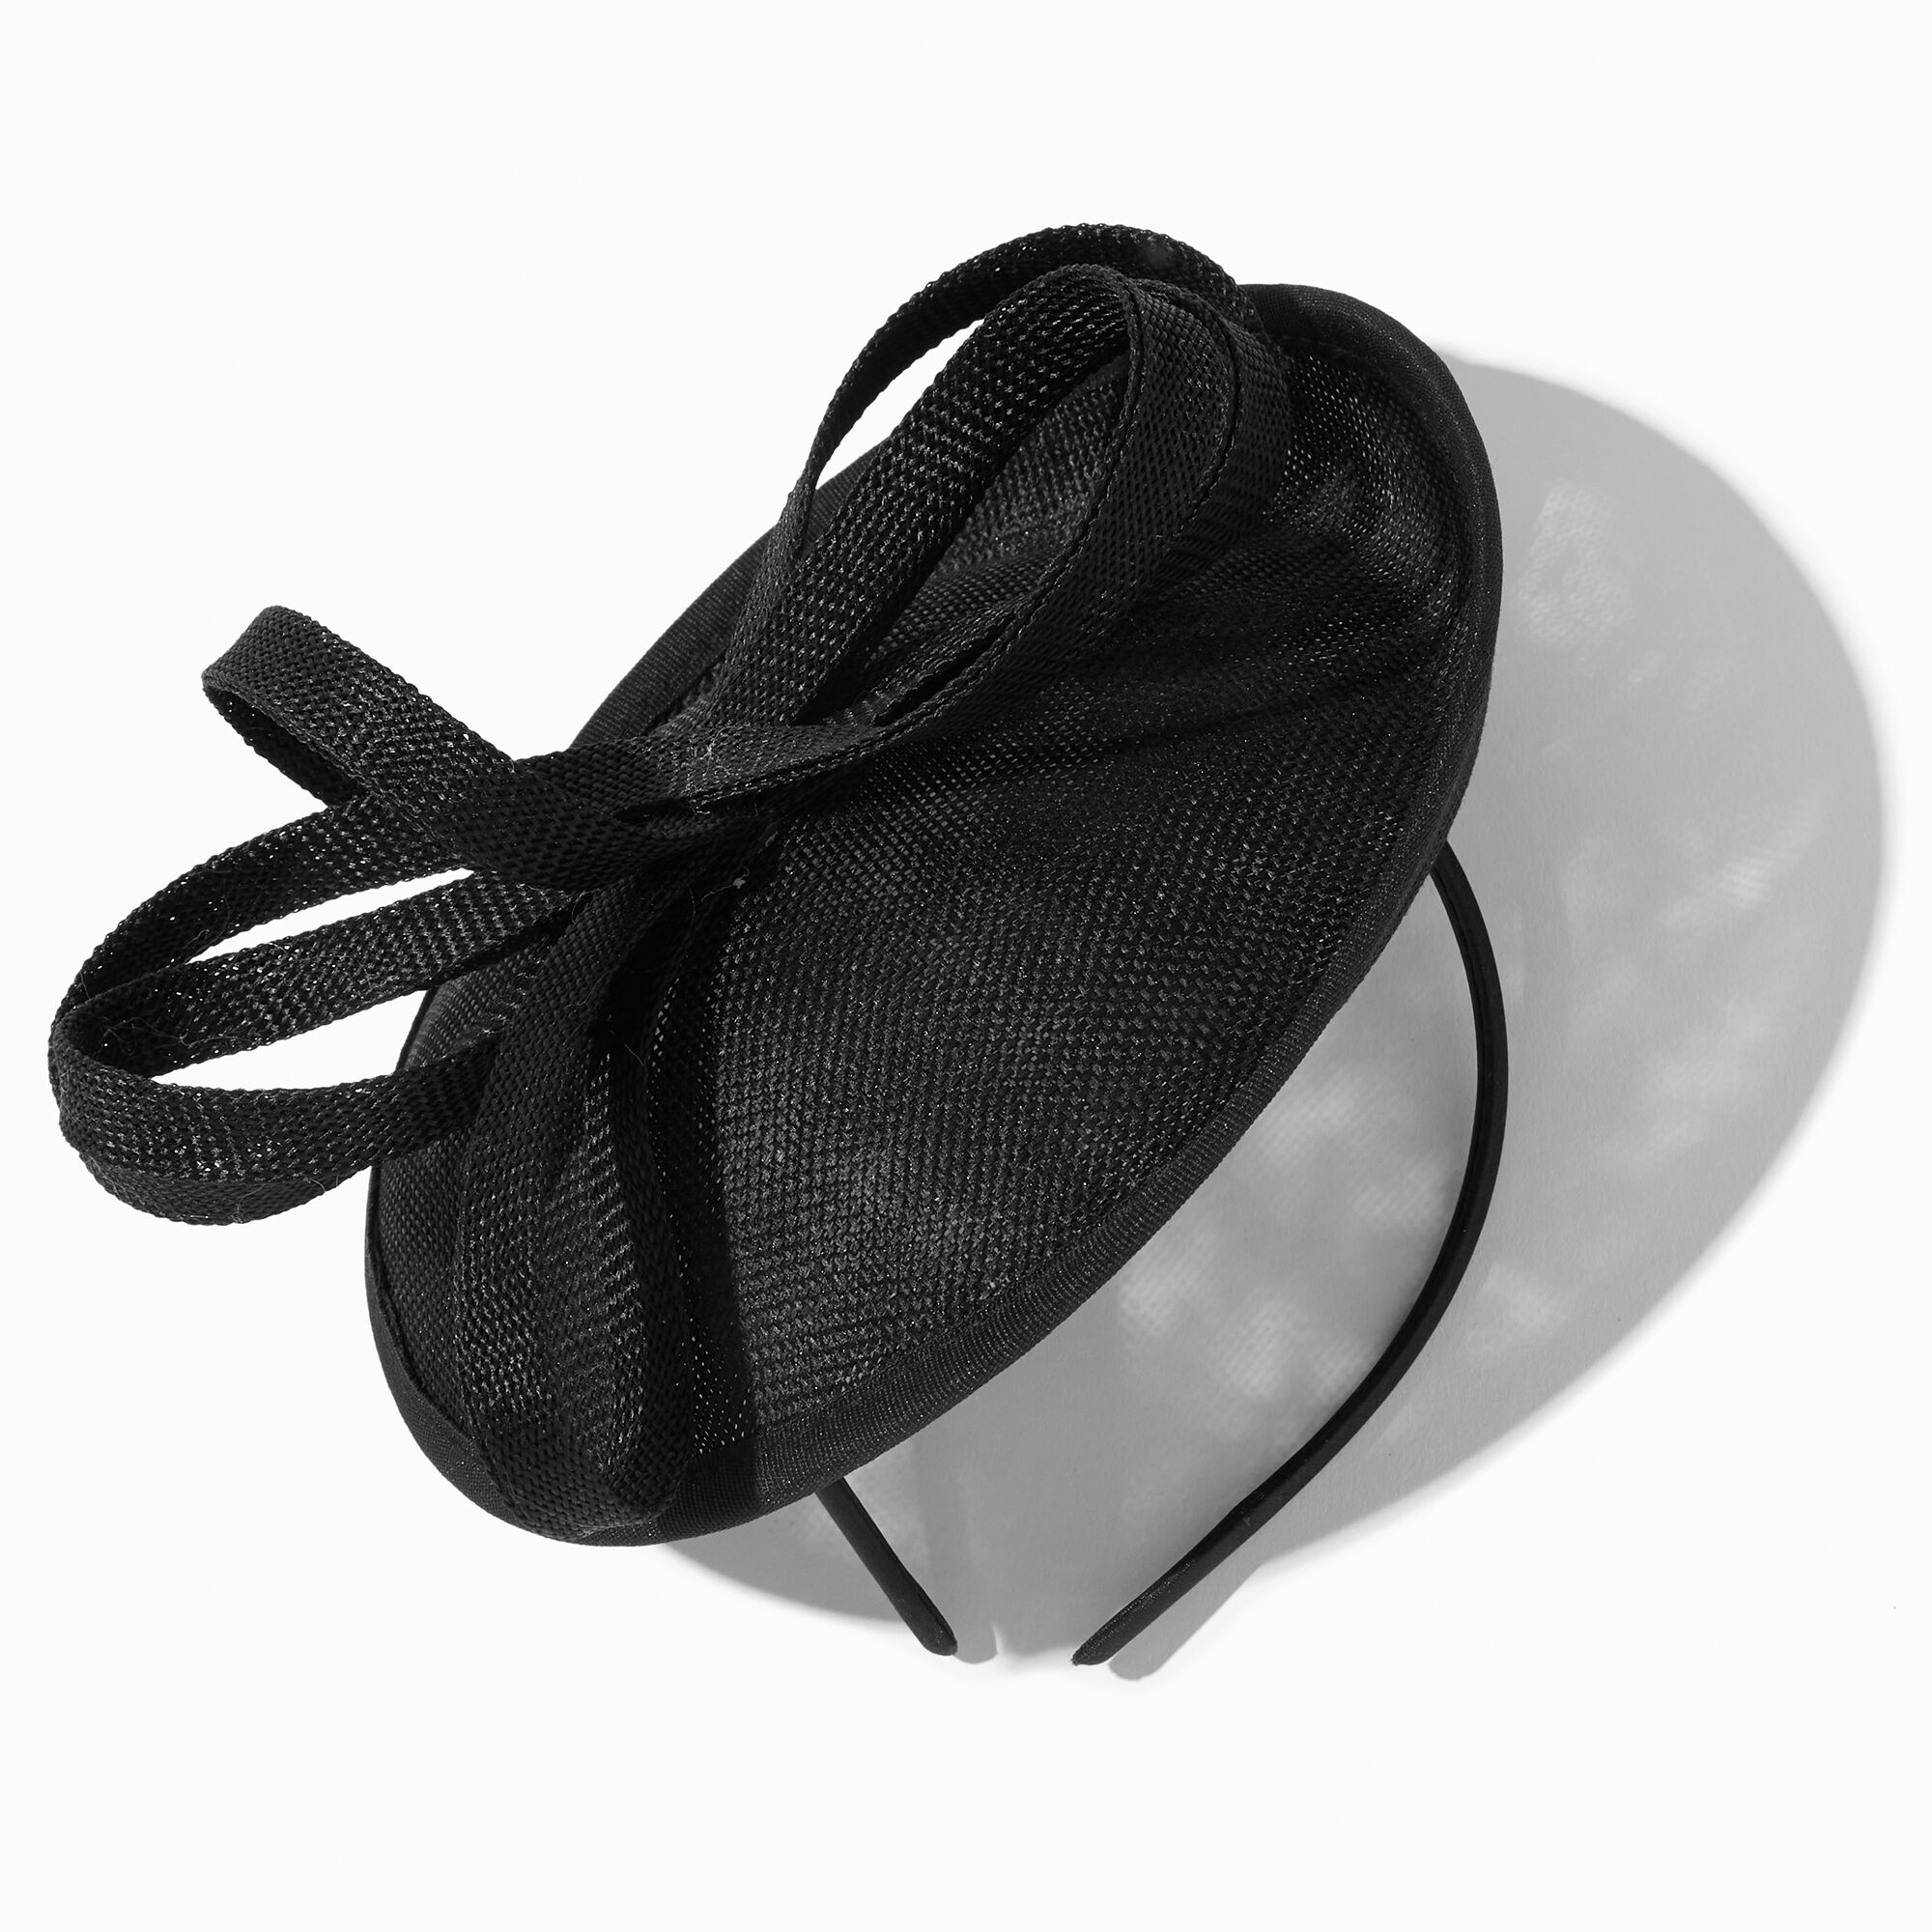 View Claires Ribbon Bow Saucer Headband Black information